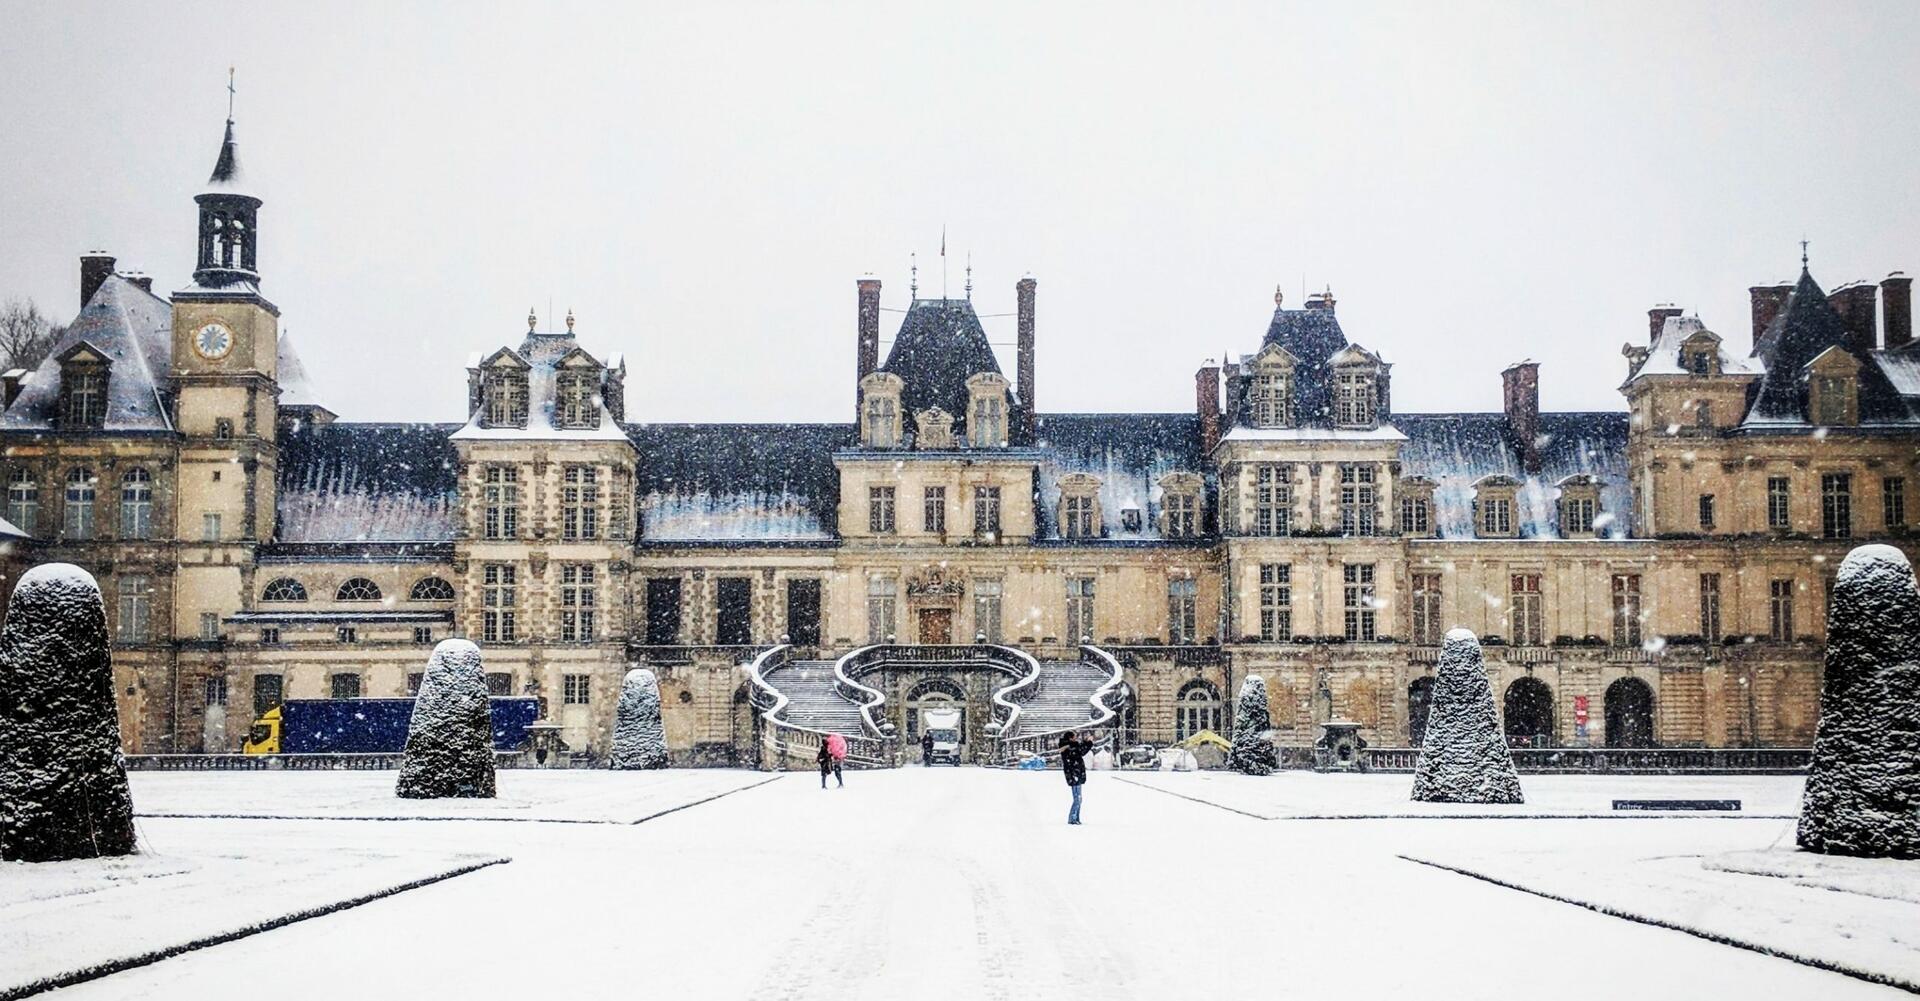 The Château de Fontainebleau, the secondary residence of the Kings